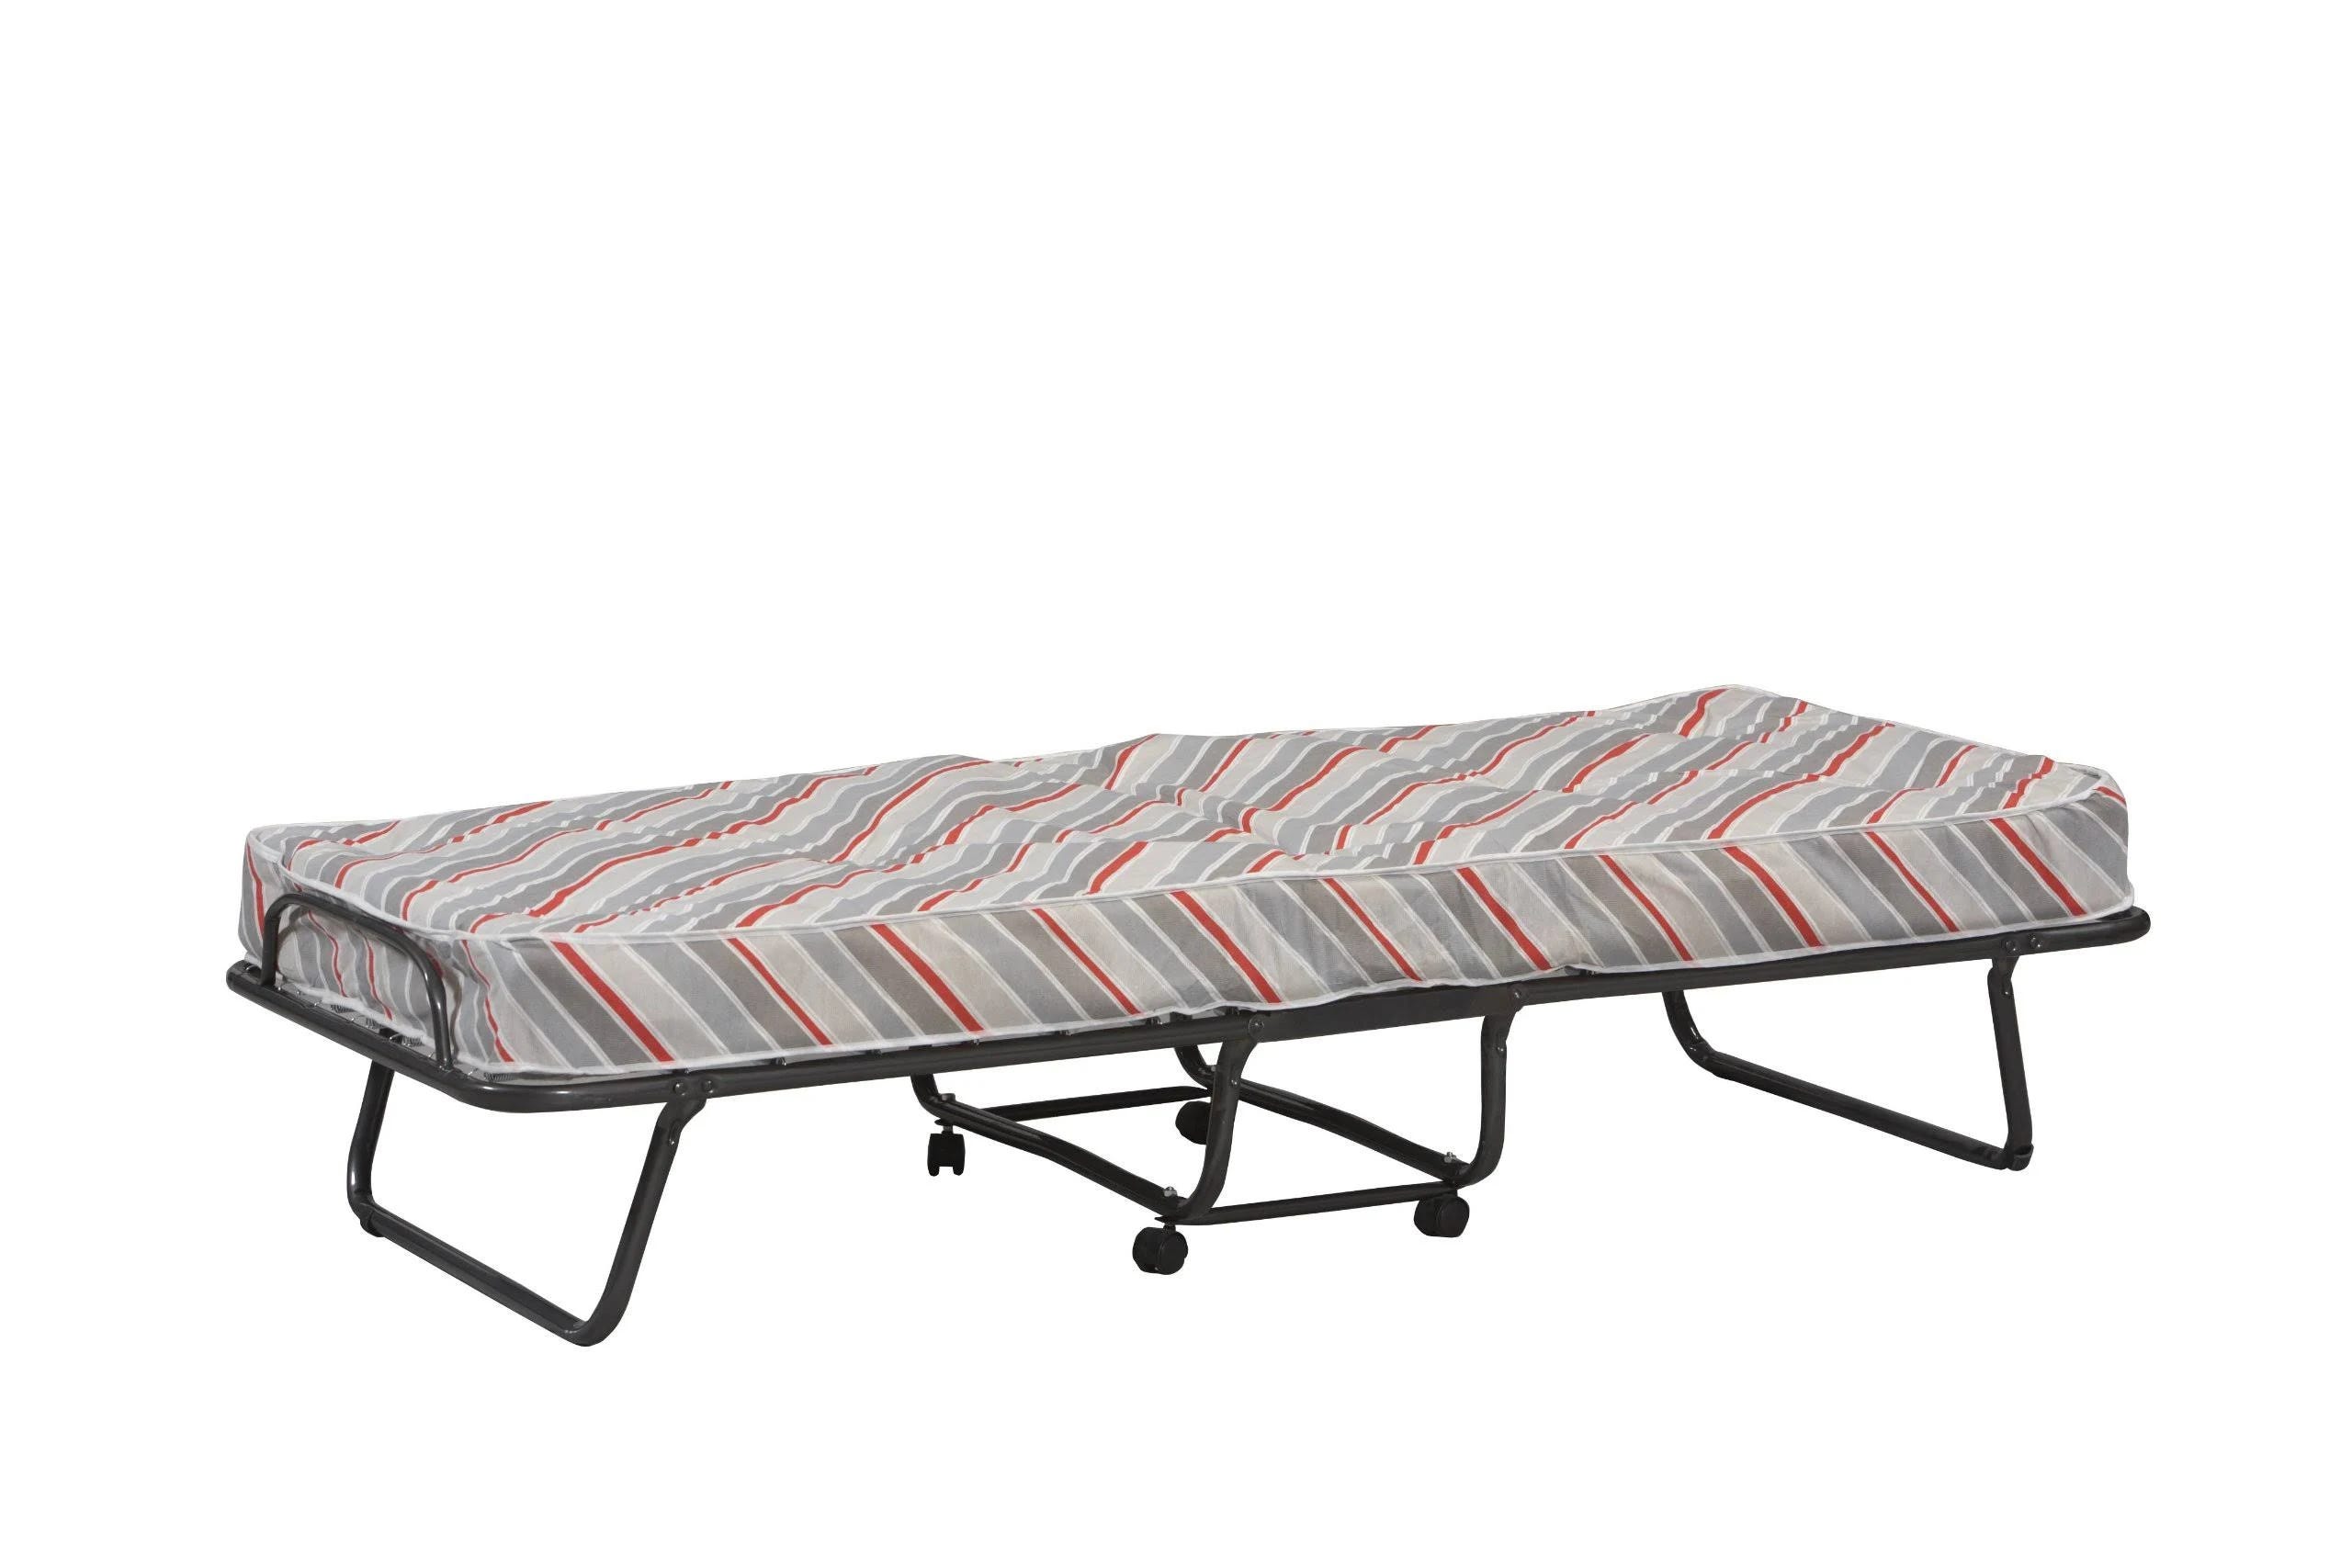 Linon Verona Twin-size Folding Bed for Guest Accommodation | Image